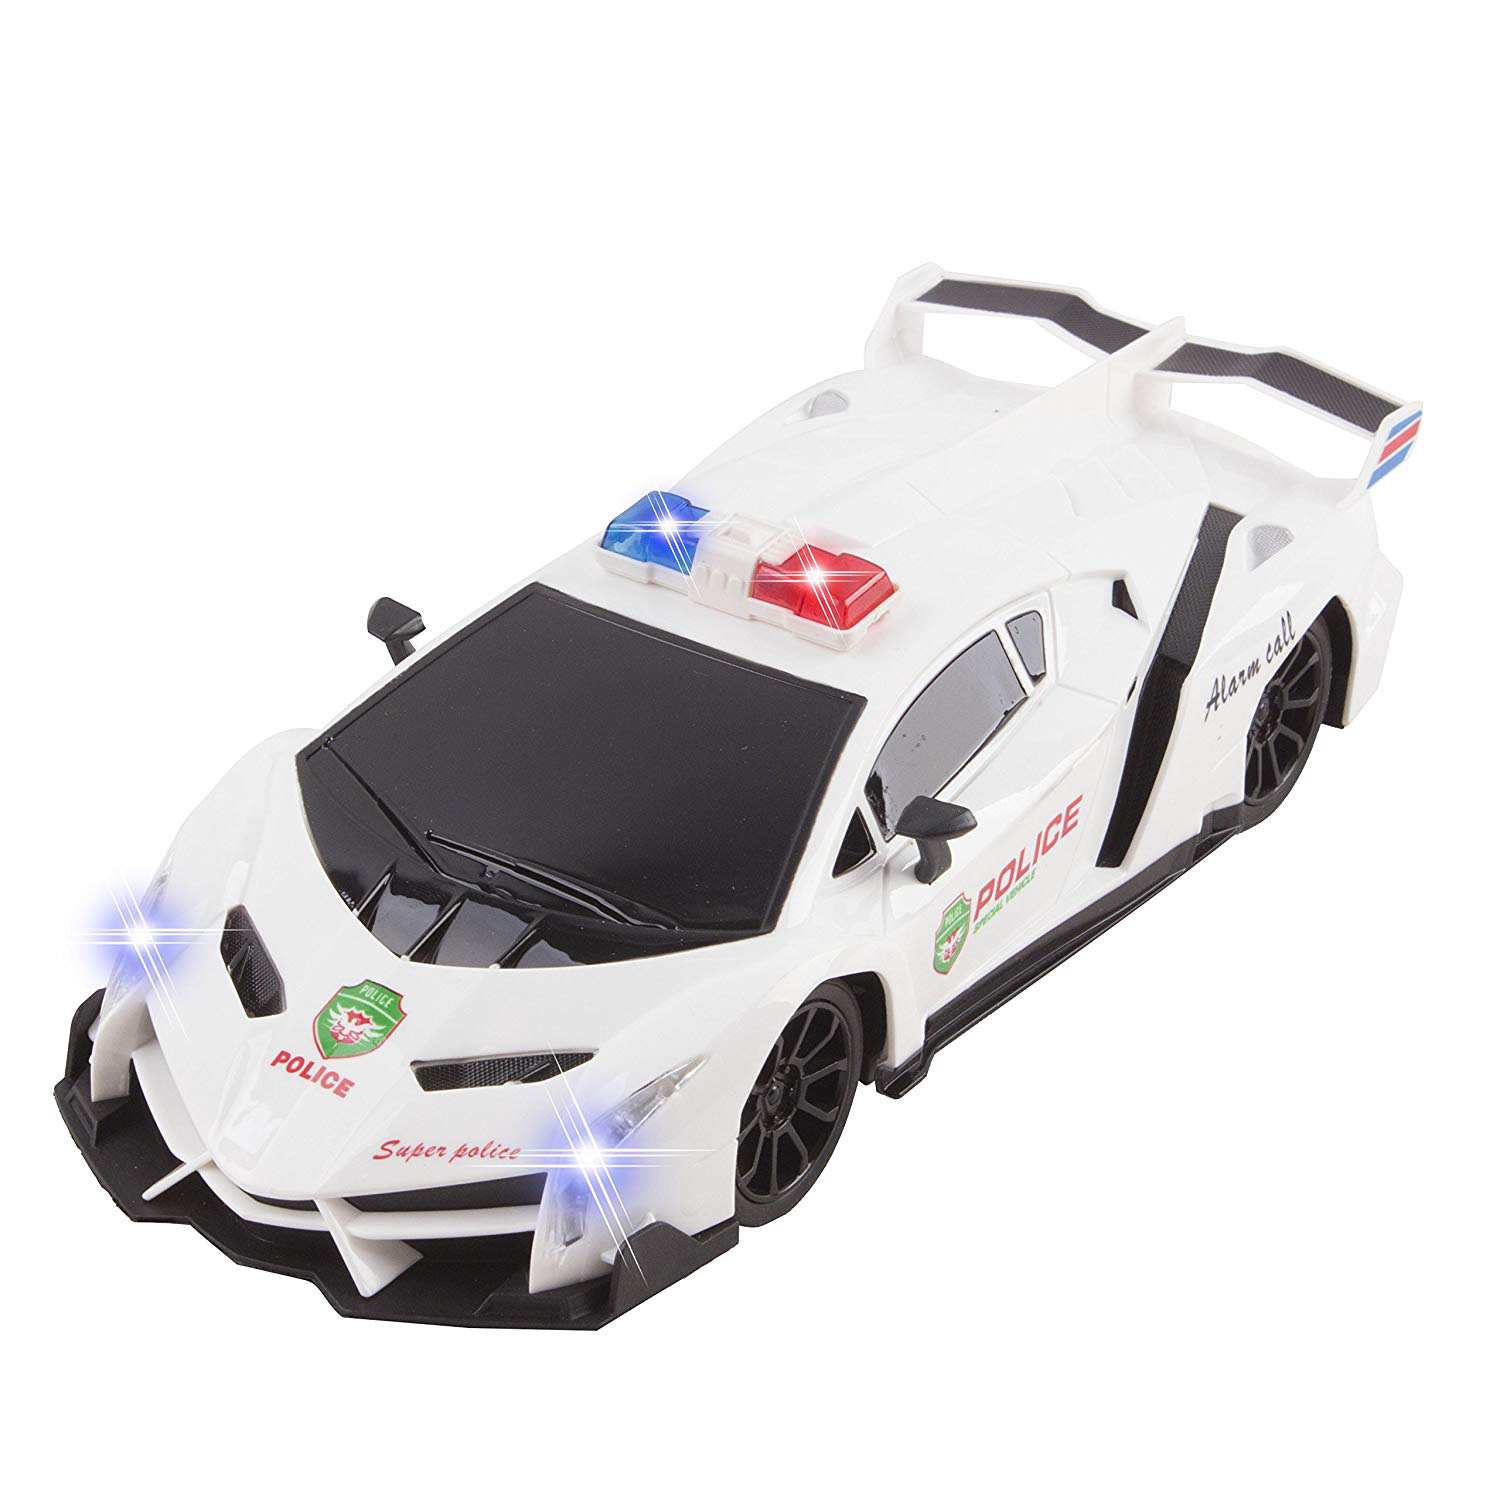 Police RC Car For Kids Super Exotic Large Remote Control Easy To Operate Toy Sports Car with Working Headlights And Sirens Perfect Cop Race Vehicle (White) 789-600C